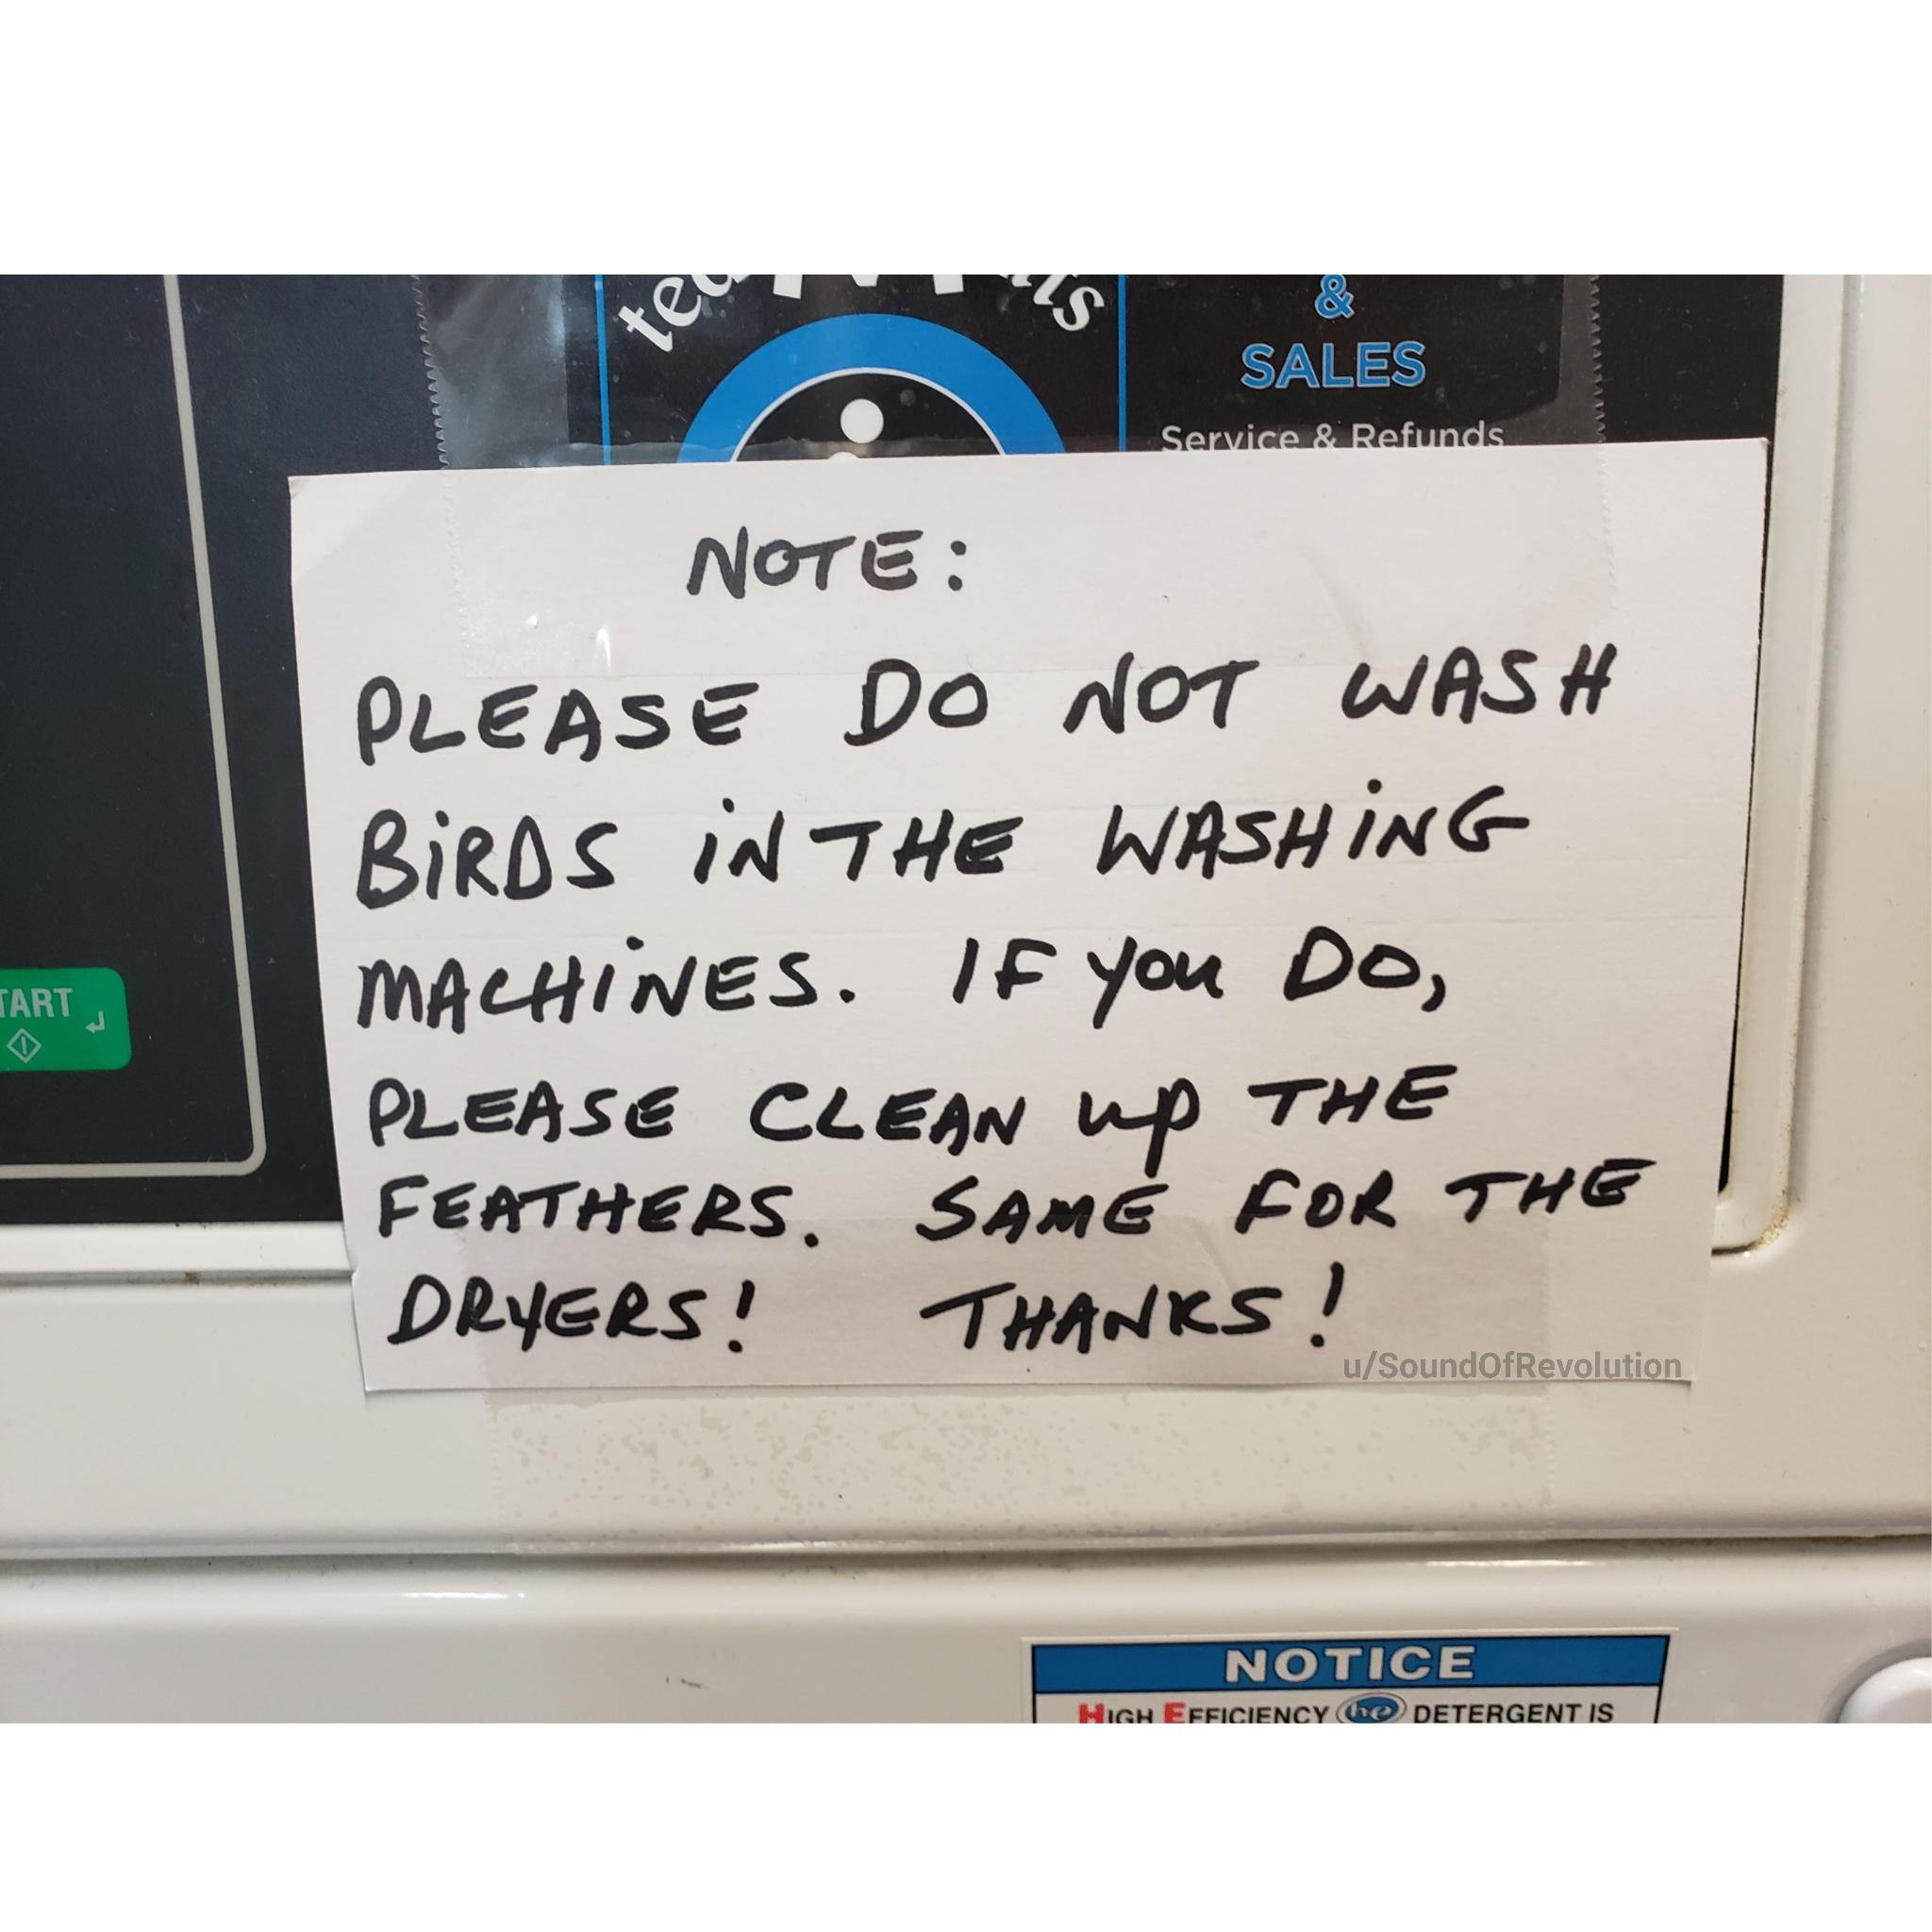 signage - Sales Service & Refunds Note Please Do Not Wash Birds In The Washing Machines. If you Do, Please Clean Up The Feathers. Sam For The Dryers! Thanks! Tart uSoundOfRevolution Notice High Efficiency O Detergent Is